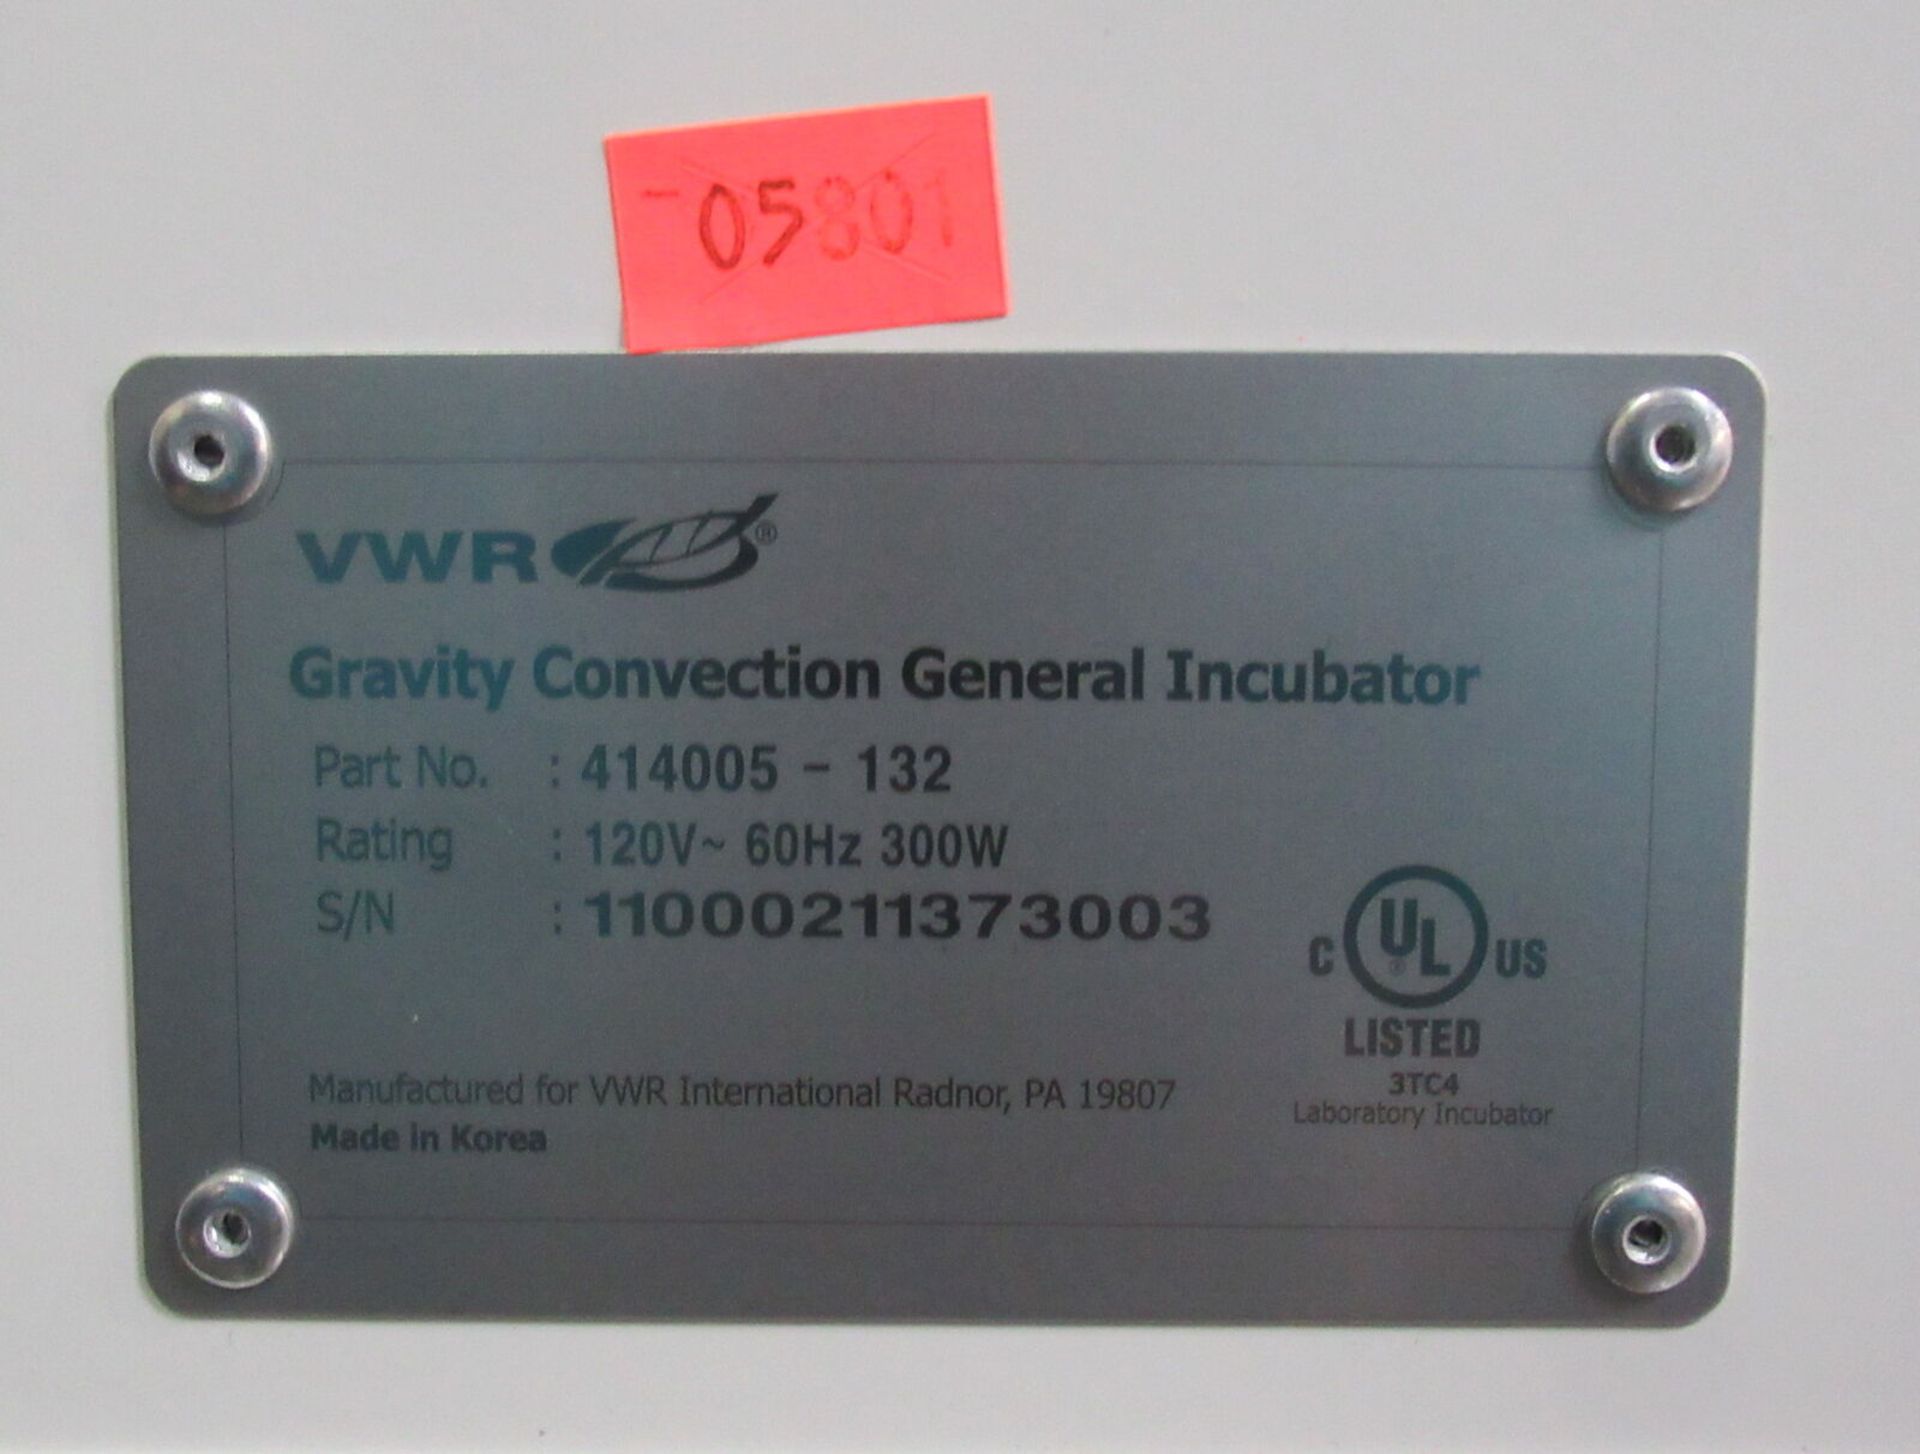 VWR 414005-132 Gravity Convection General Incubator - Image 8 of 8